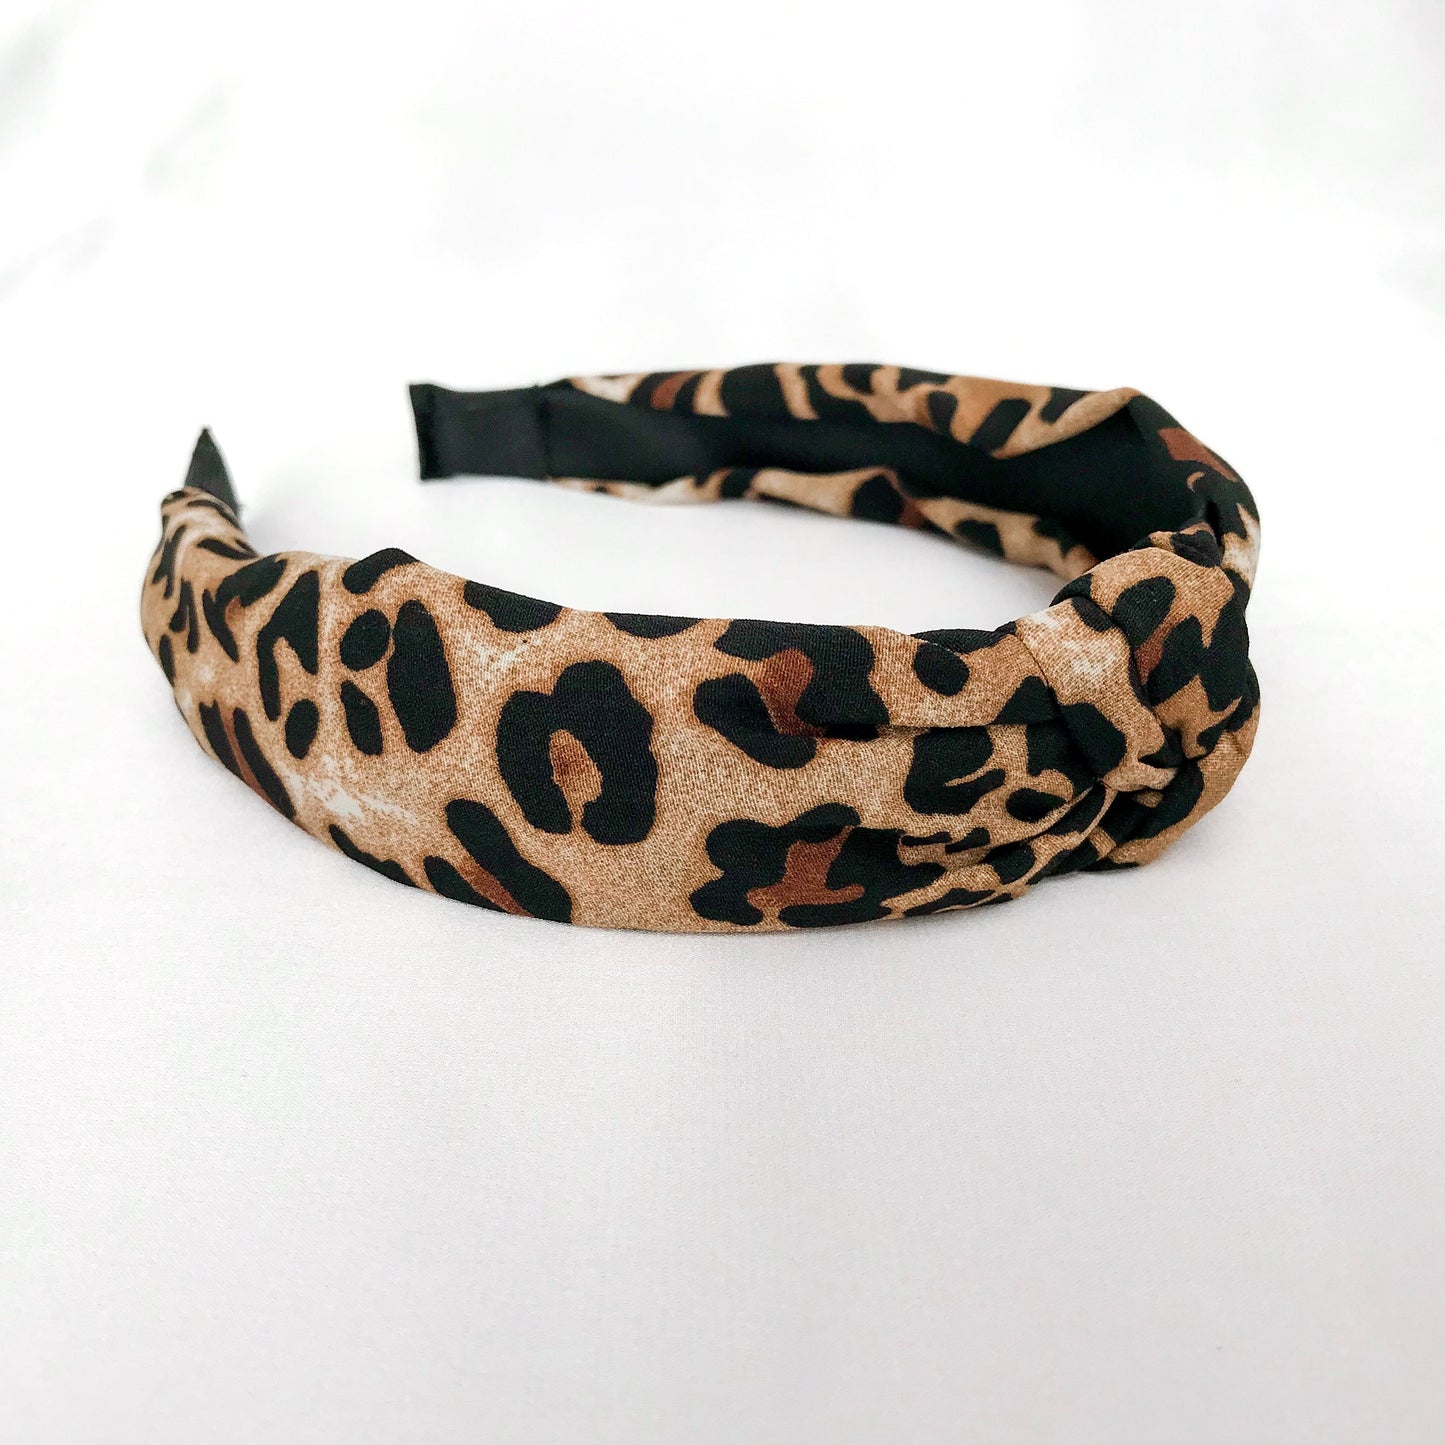 Leopard Print Knotted Headband - Lacey Lou Sparkles